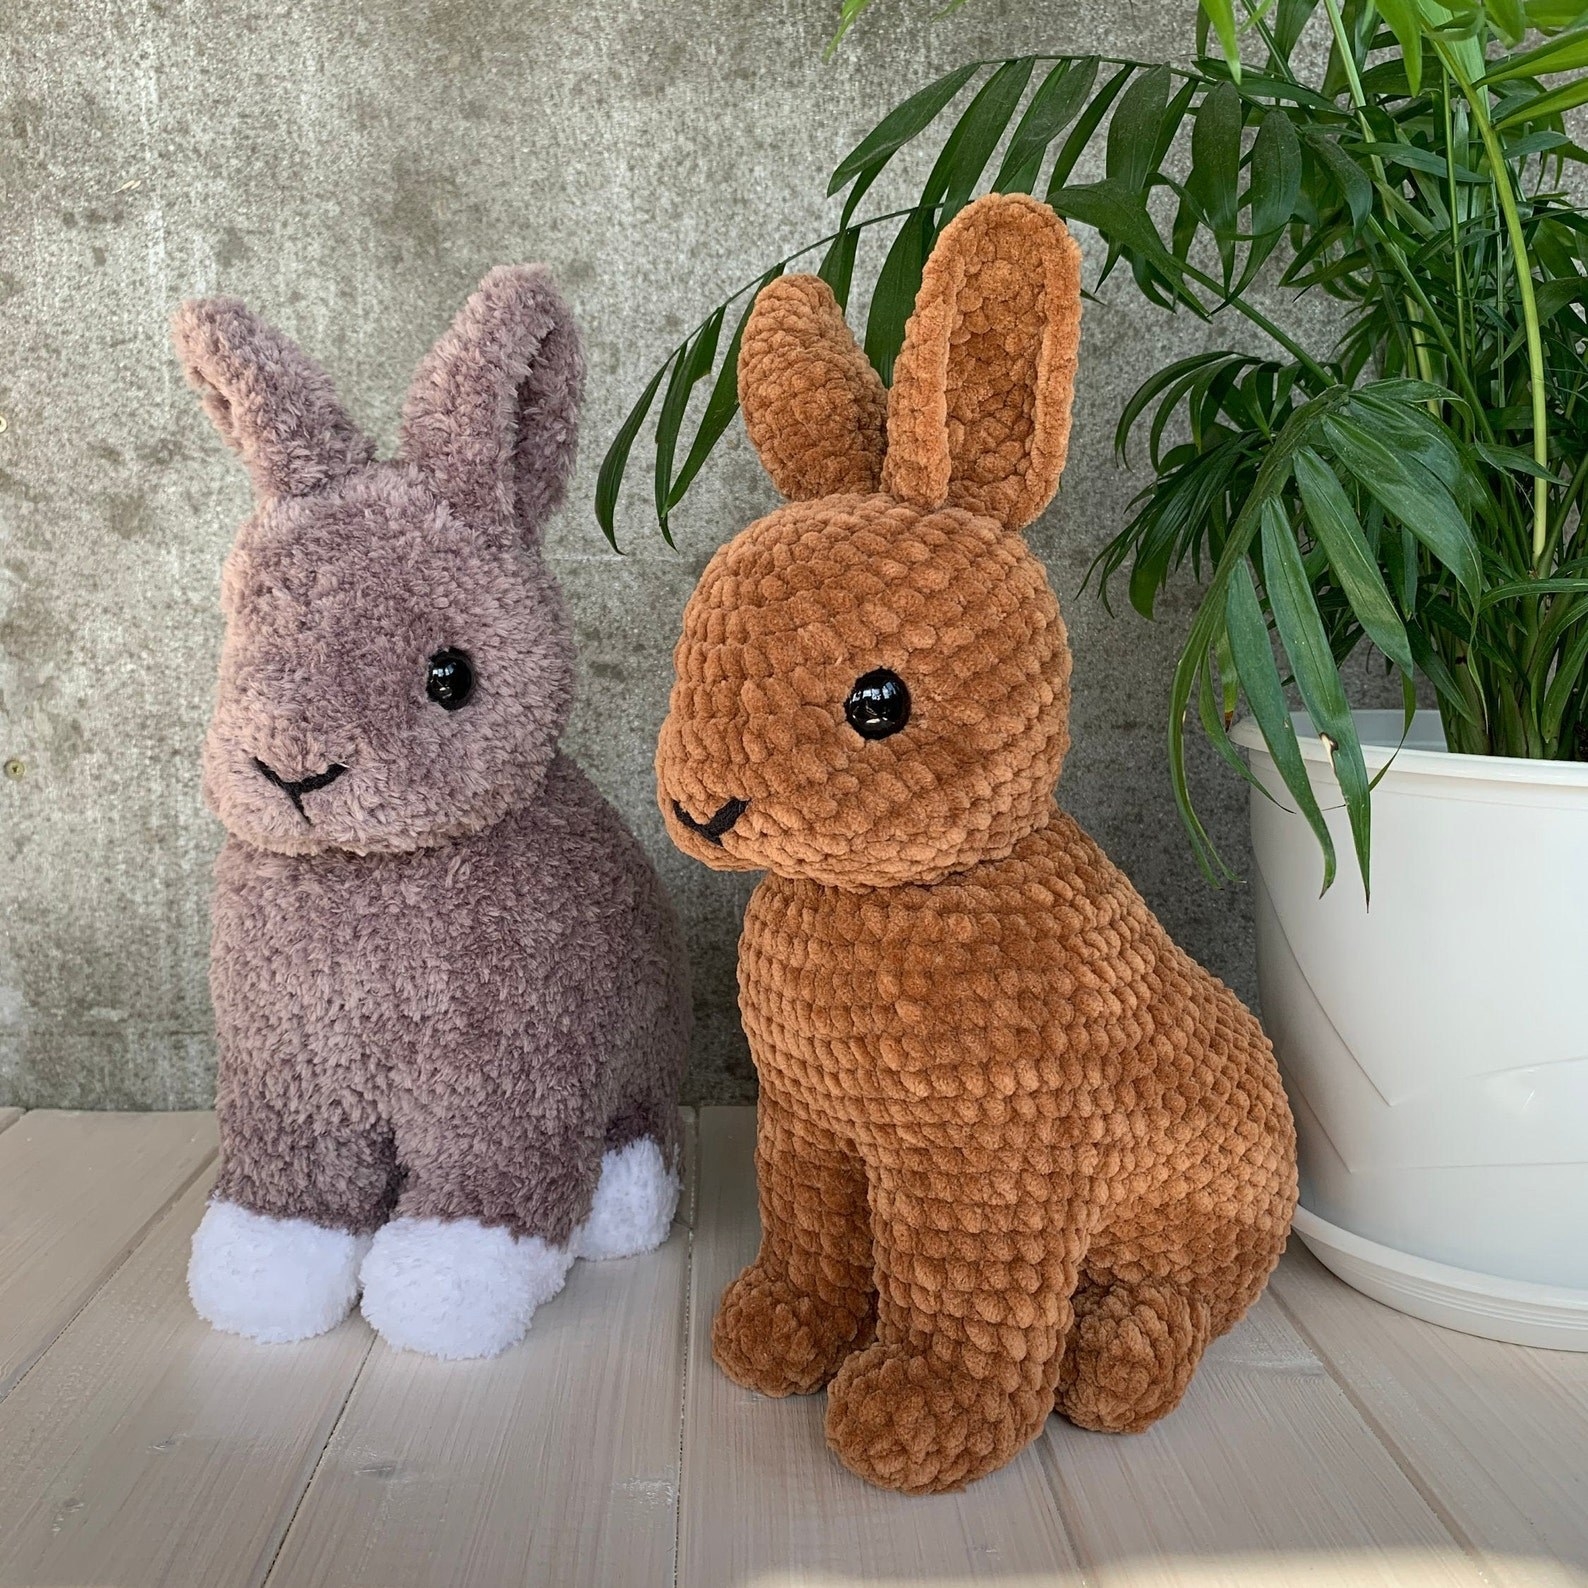 two bunnies made with the pattern